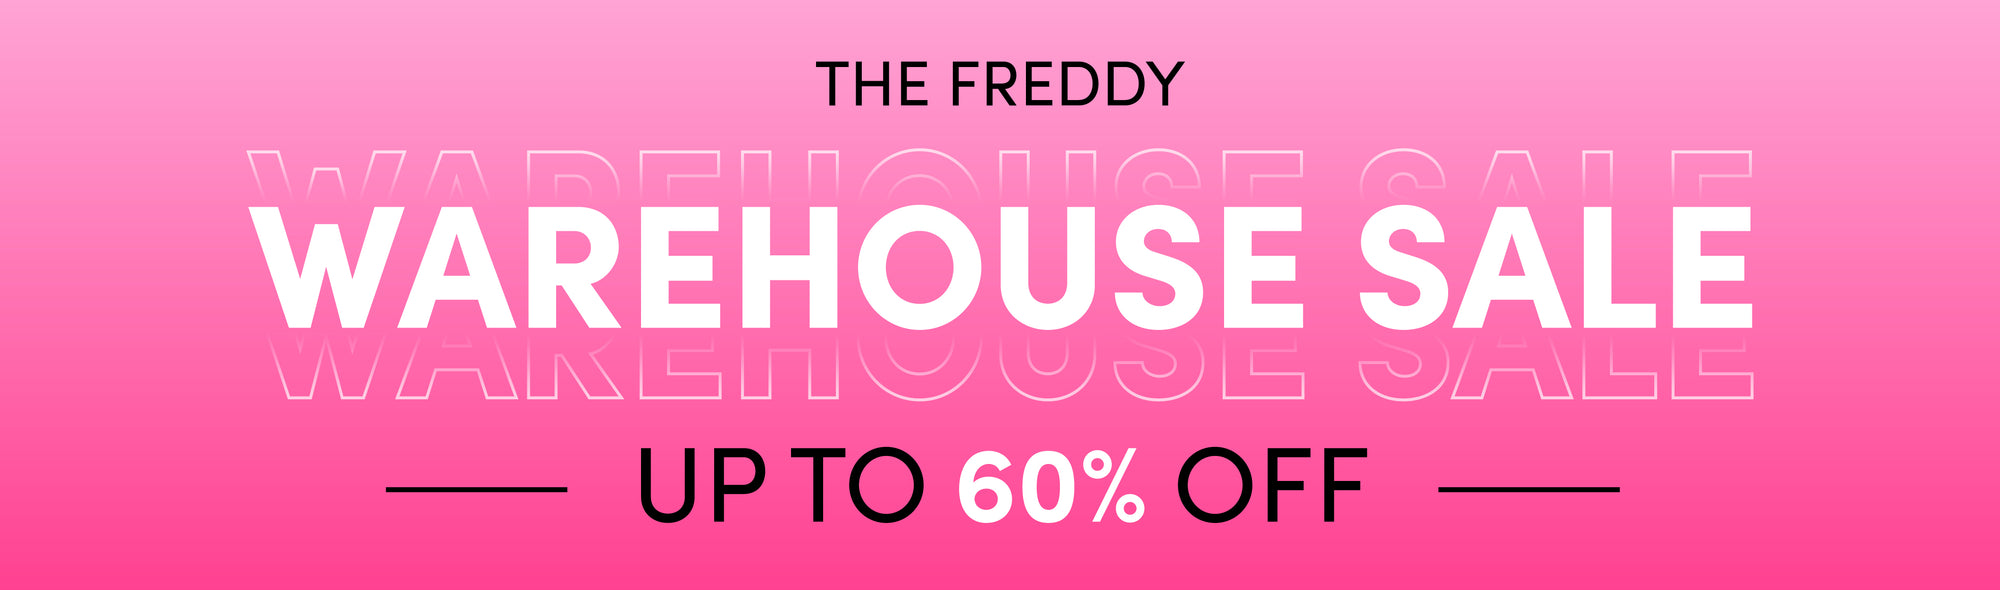 Up to 60% Off Warehouse Sale